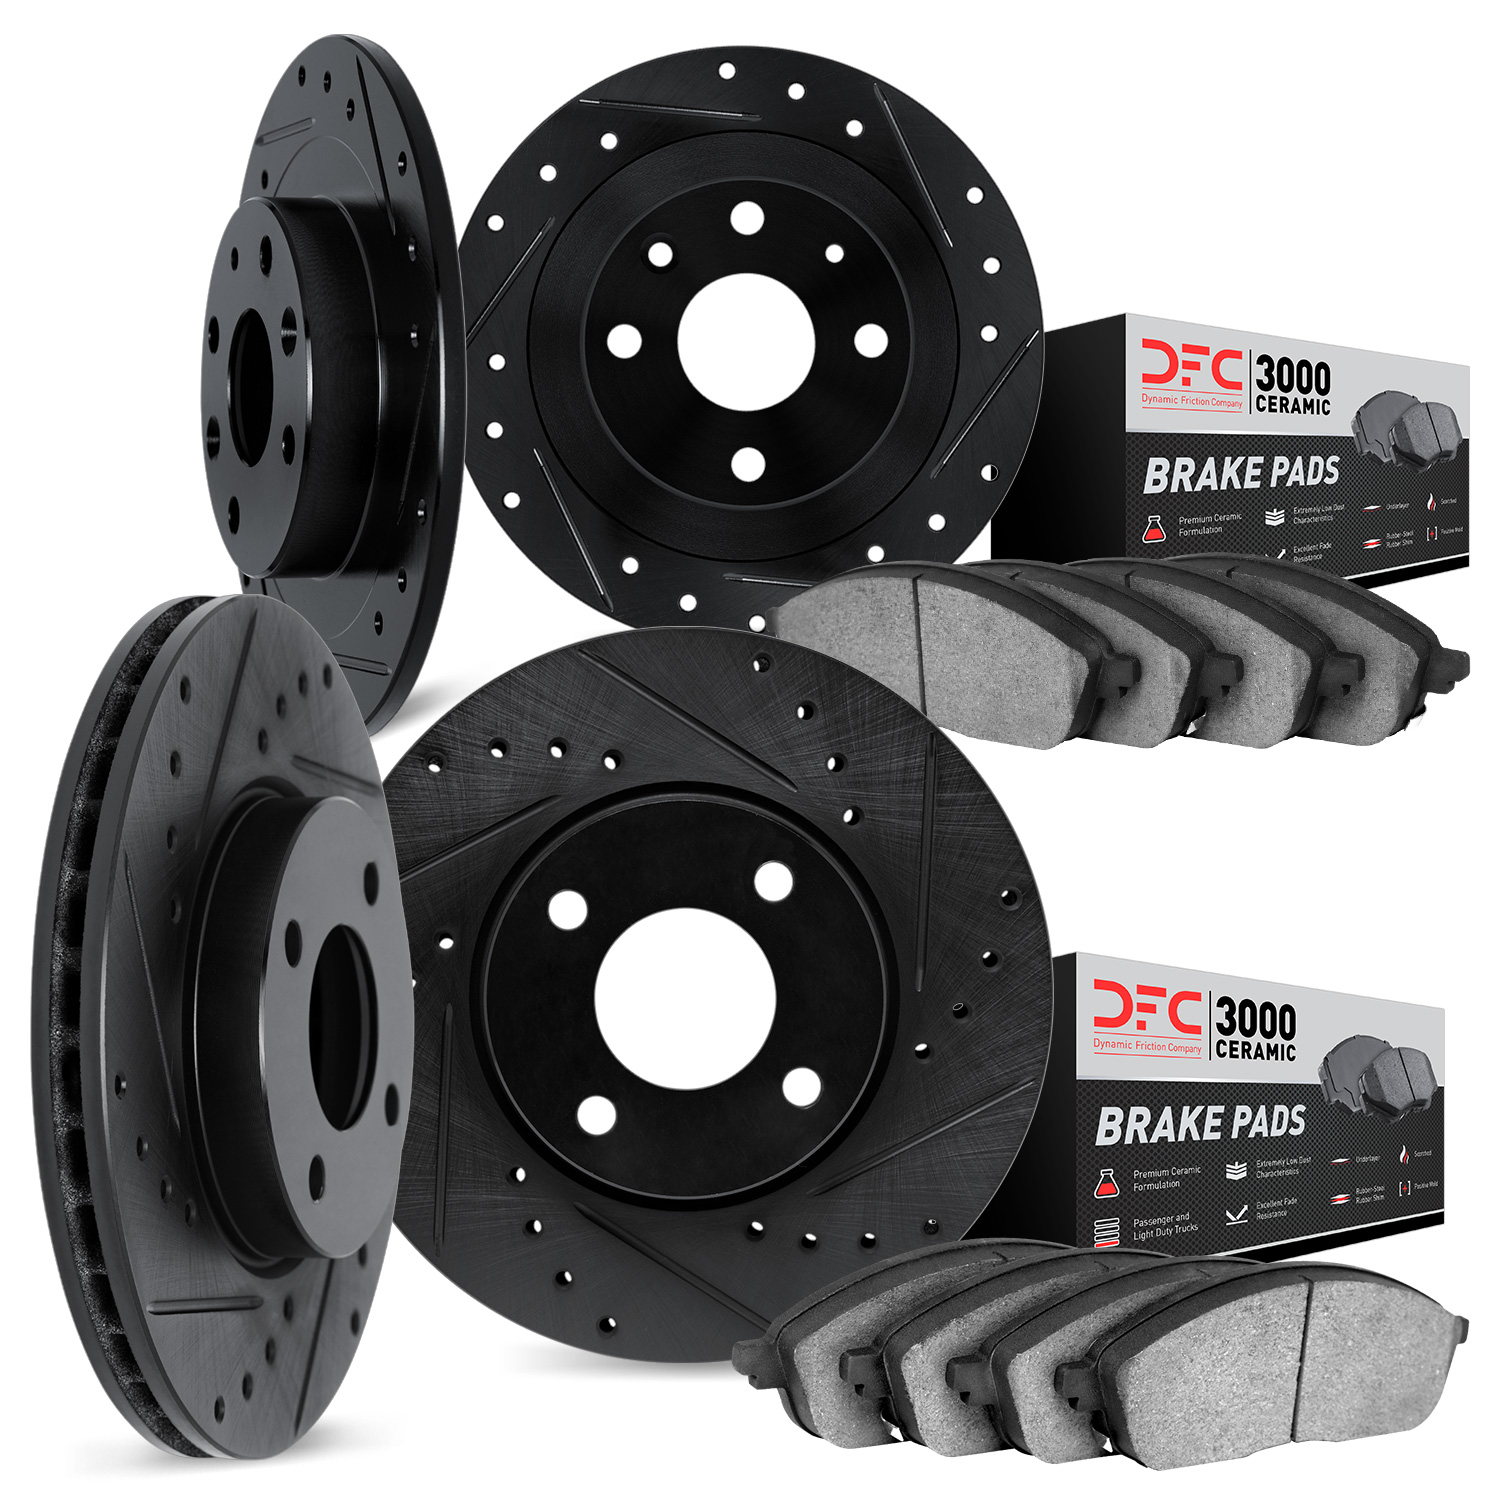 8304-59011 Drilled/Slotted Brake Rotors with 3000-Series Ceramic Brake Pads Kit [Black], 1992-1997 Acura/Honda, Position: Front